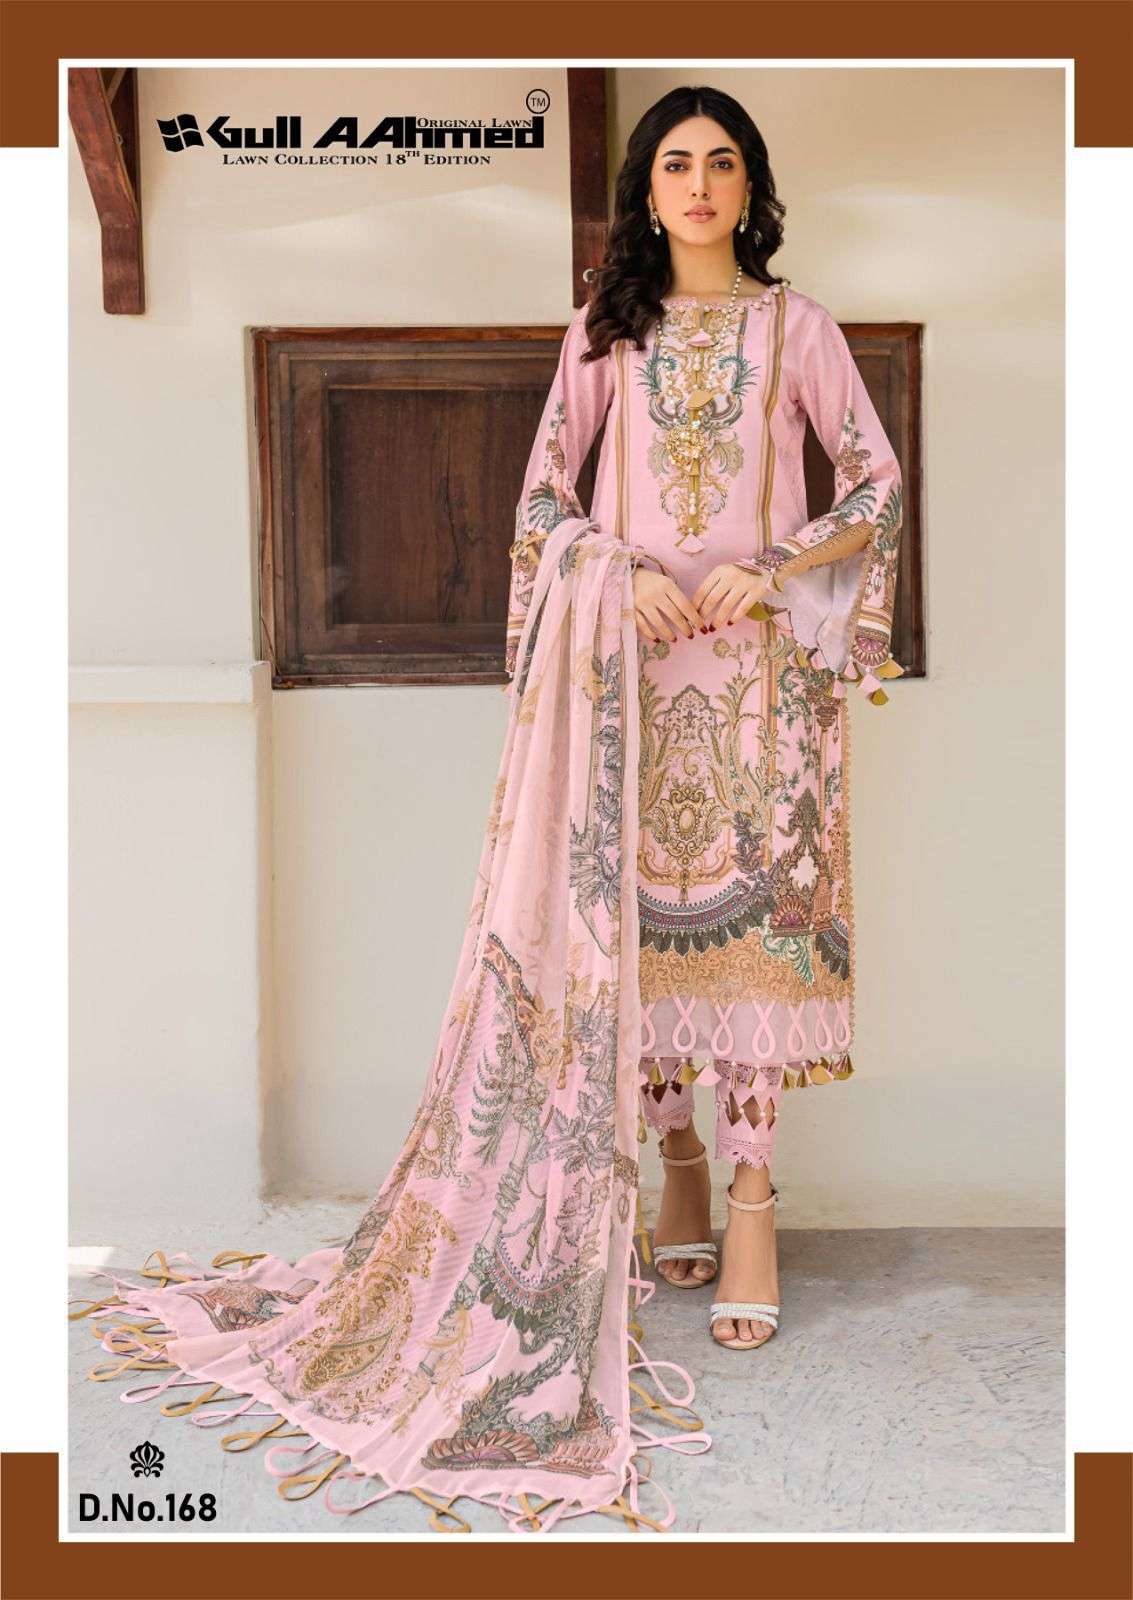 GULL AAHMED LAWN COLLECTION VOL 18 